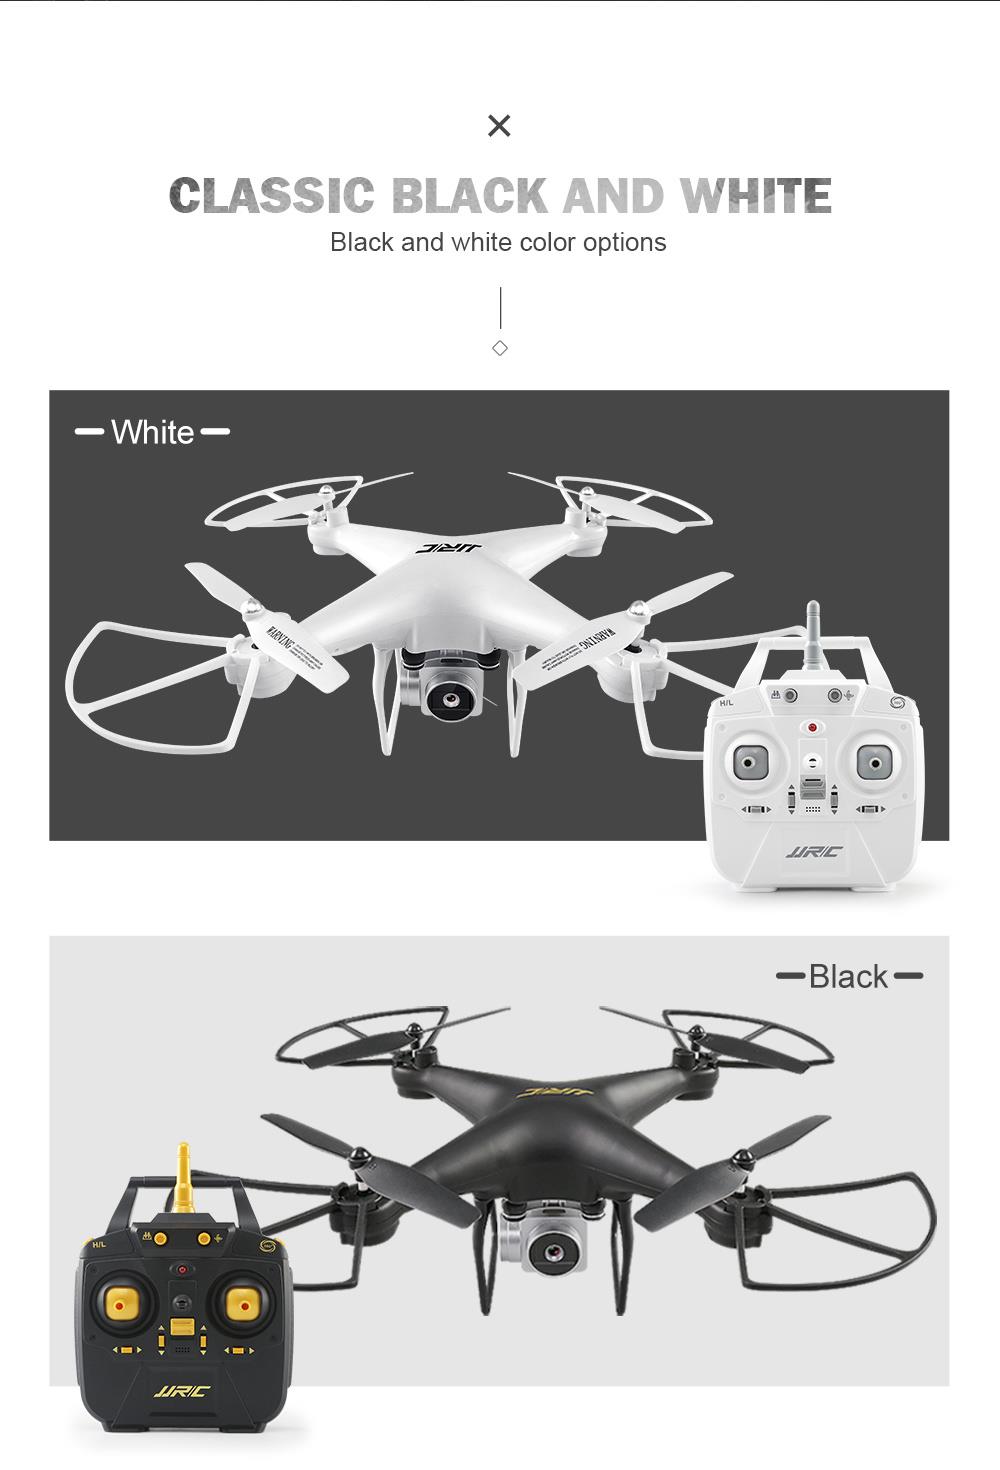 GeekbuyingJJRC H68 BELLWETHER WiFi FPV RC Drone Max Flight Time 20mins with 720P HD Camera Altitude Hold Mode Black - Two Batteries